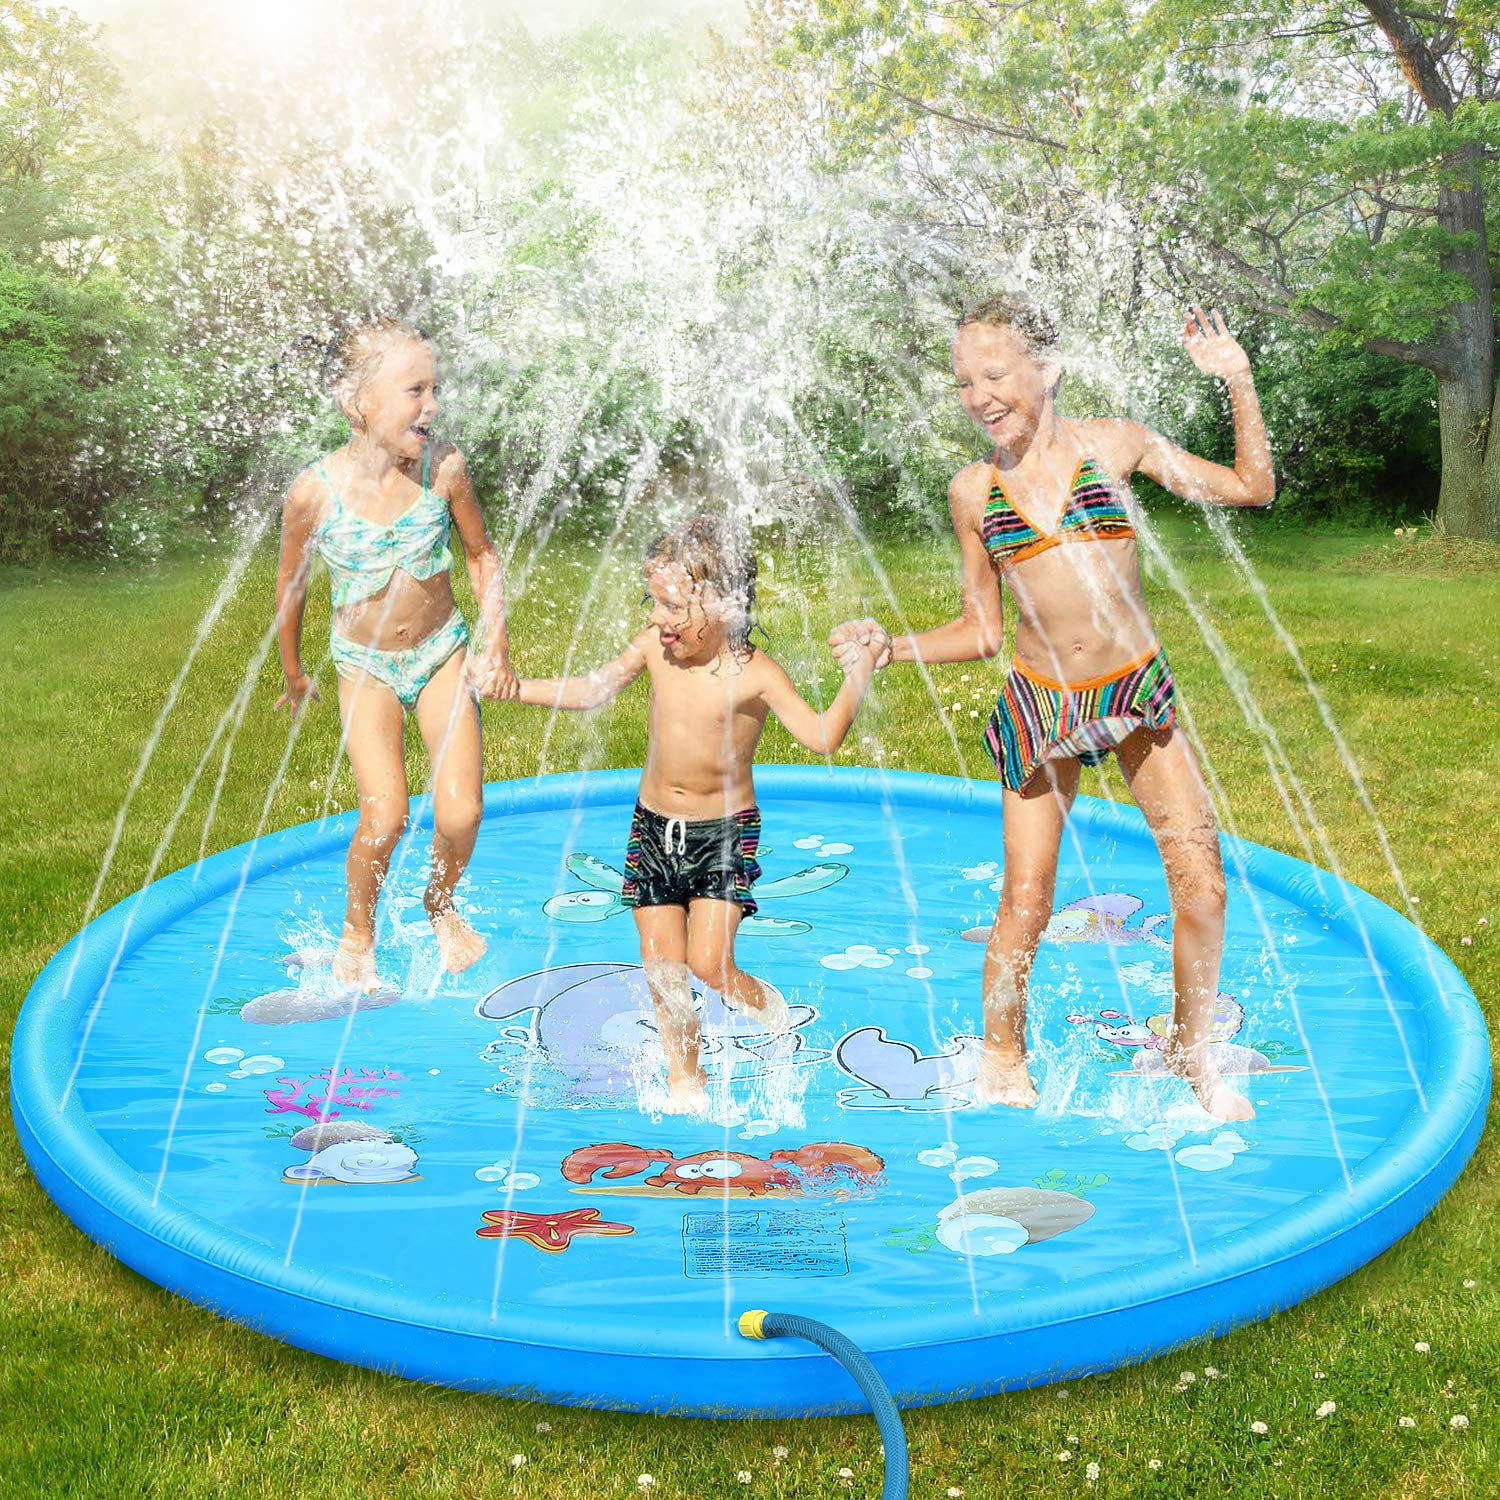 JLJLJL Baby Splash Pad Pool,Rainbow Splash Pool with Canopy Spray Pool of 40 Inches Water Sprinkler for Kids for Ages 1-3 